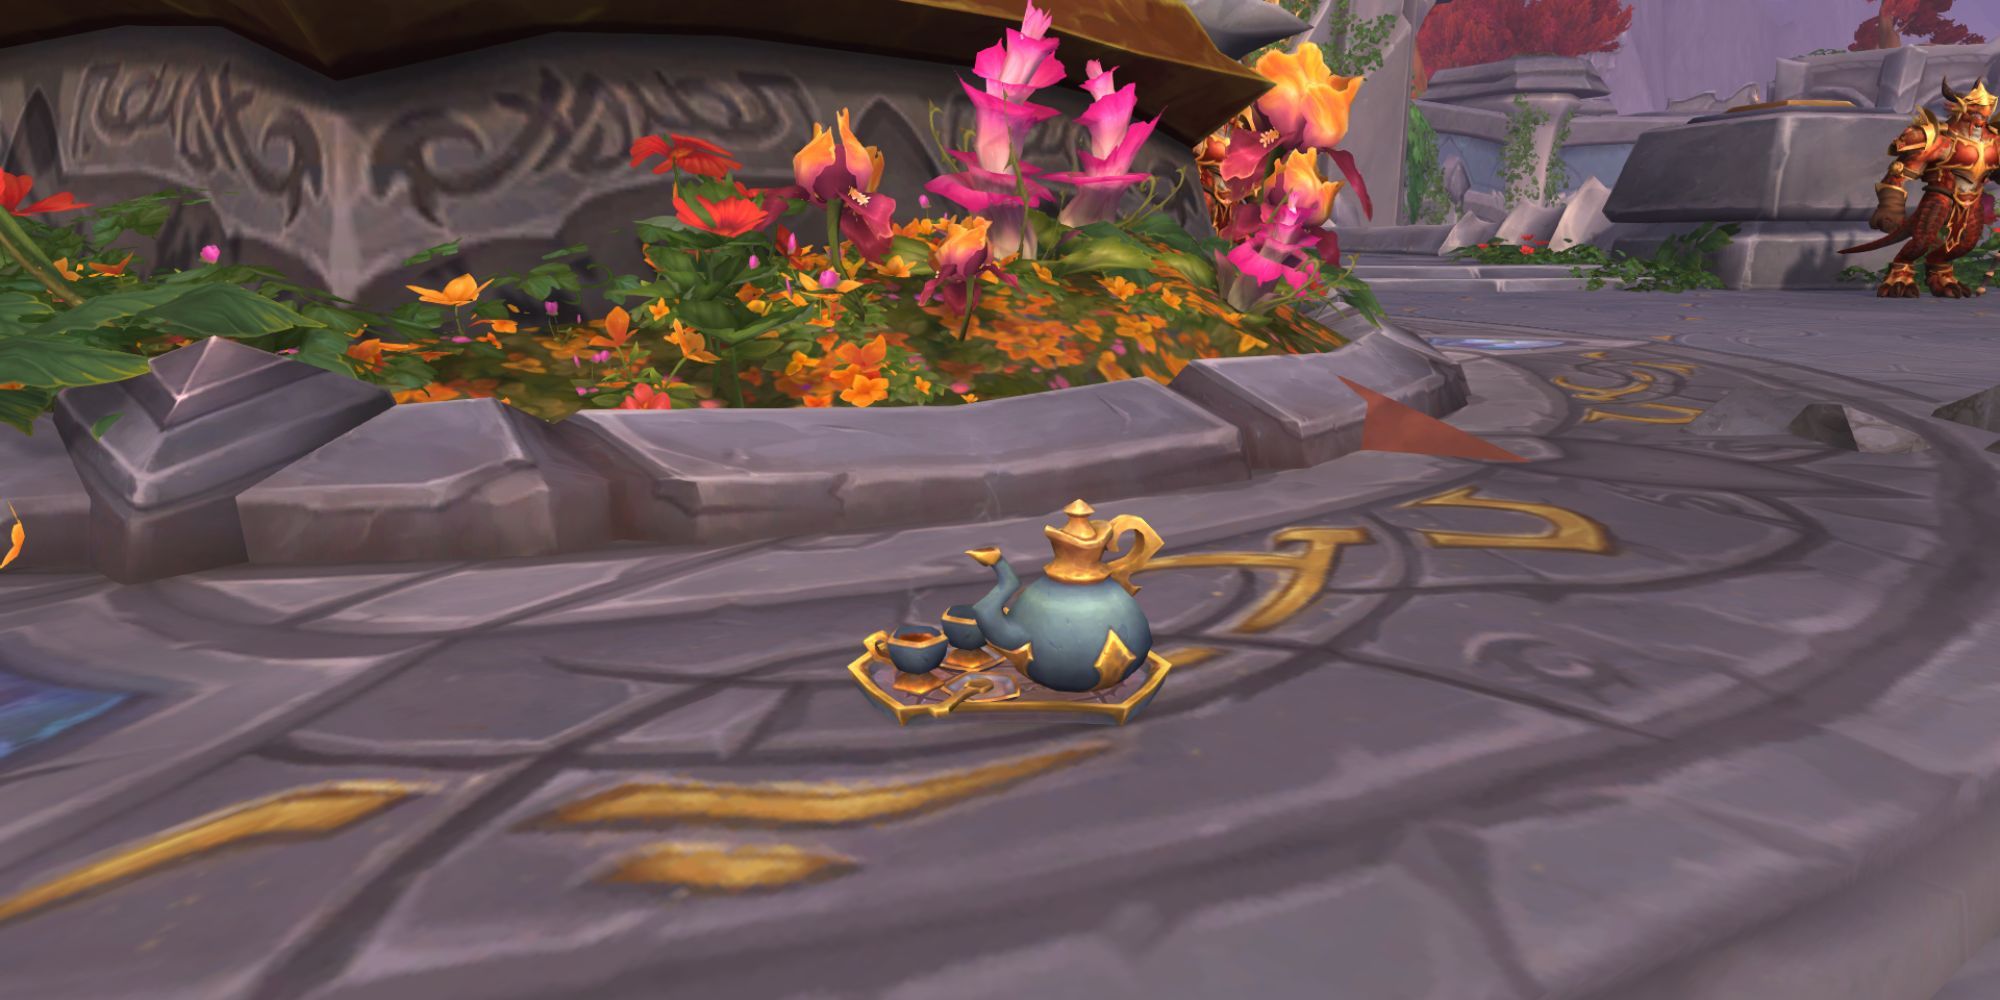 Dragon Tea Set placed on the ground in the Waking Shores